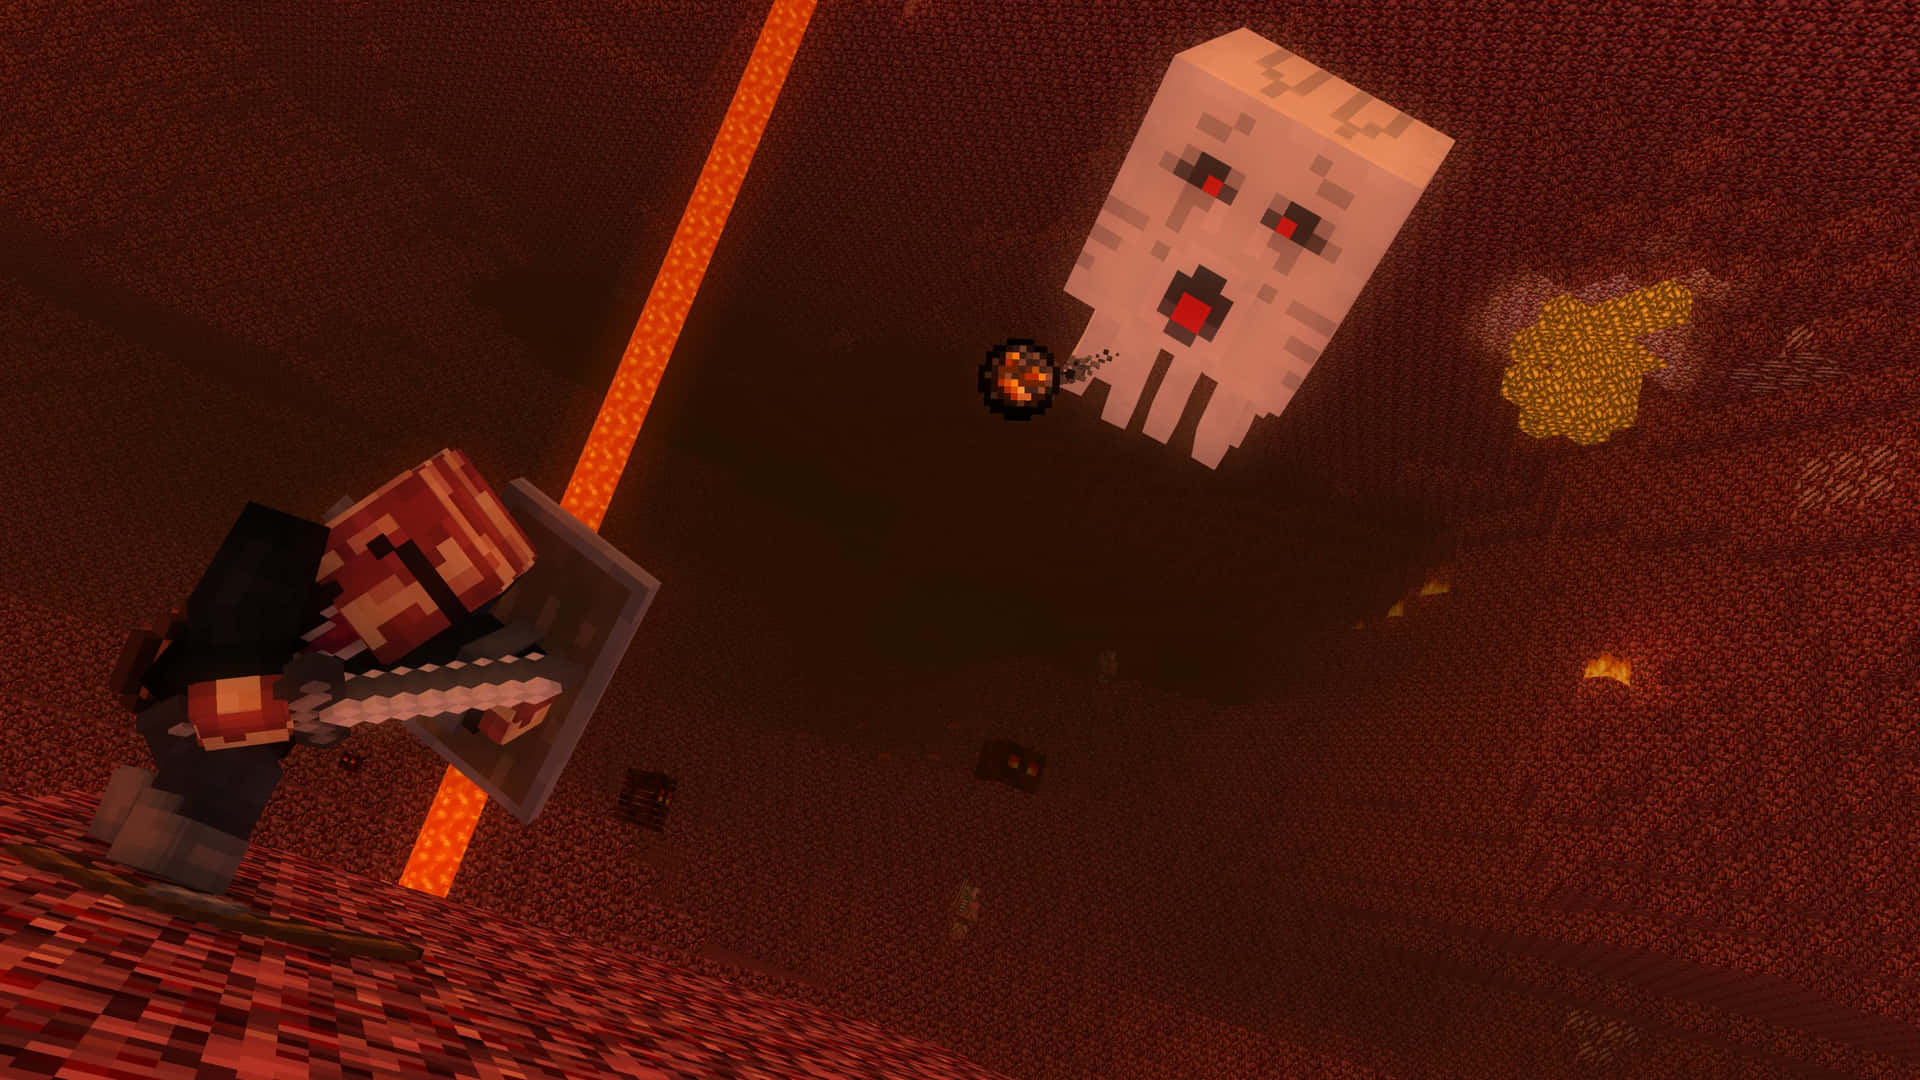 A spooky Minecraft Ghast floating in the dark Nether realm Wallpaper